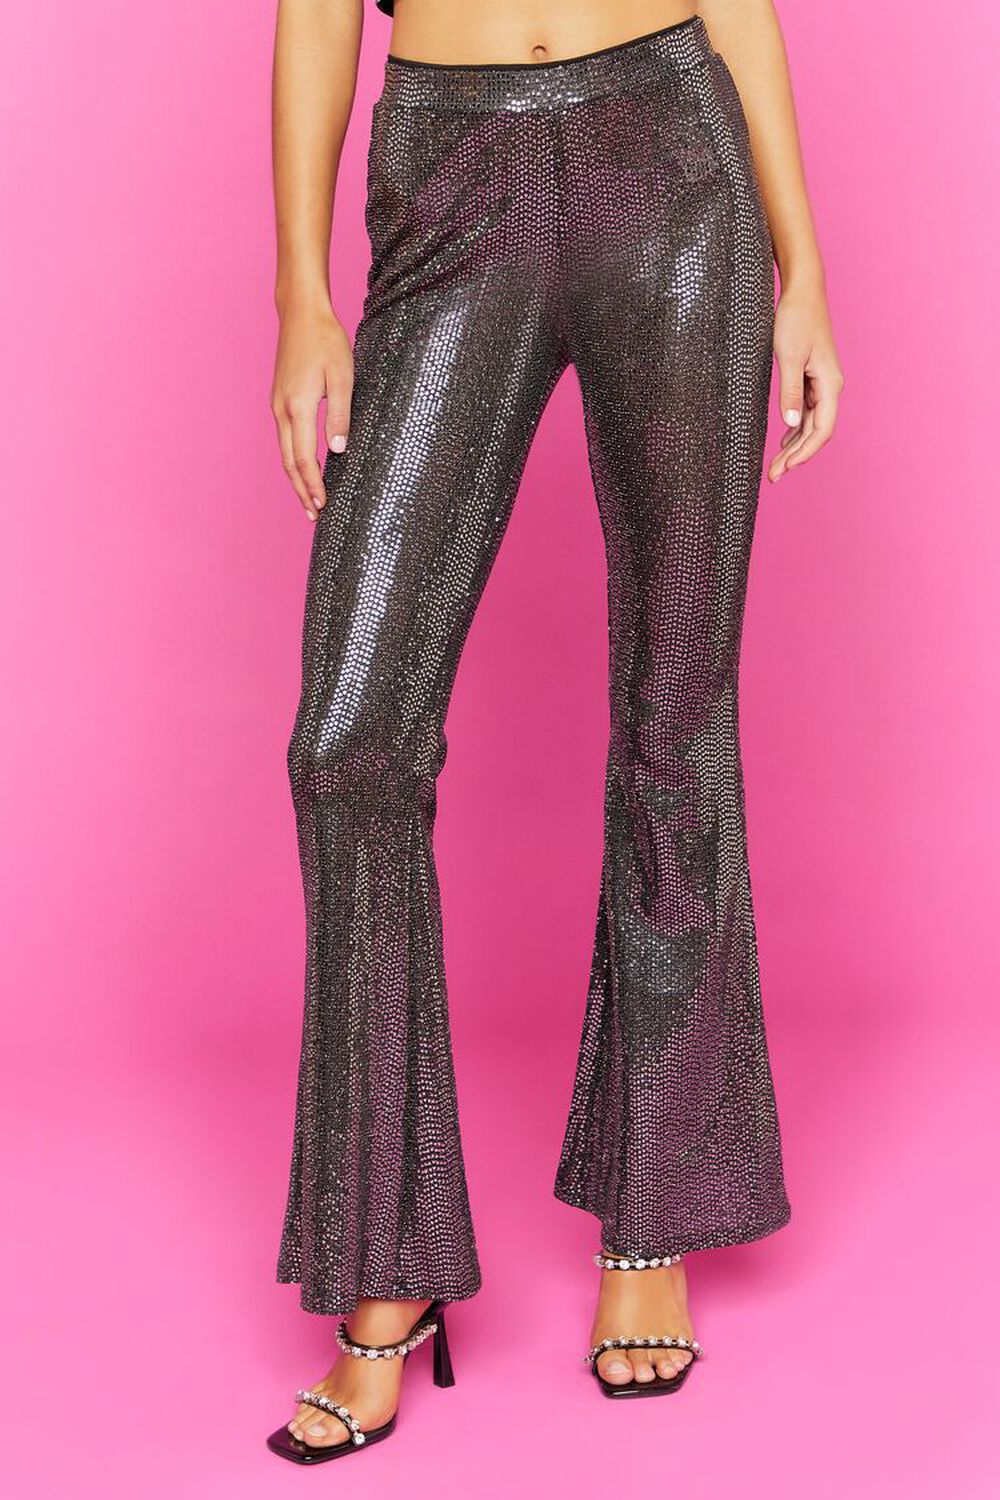 BLACK/SILVER Sequin Mid-Rise Flare Pants, image 2